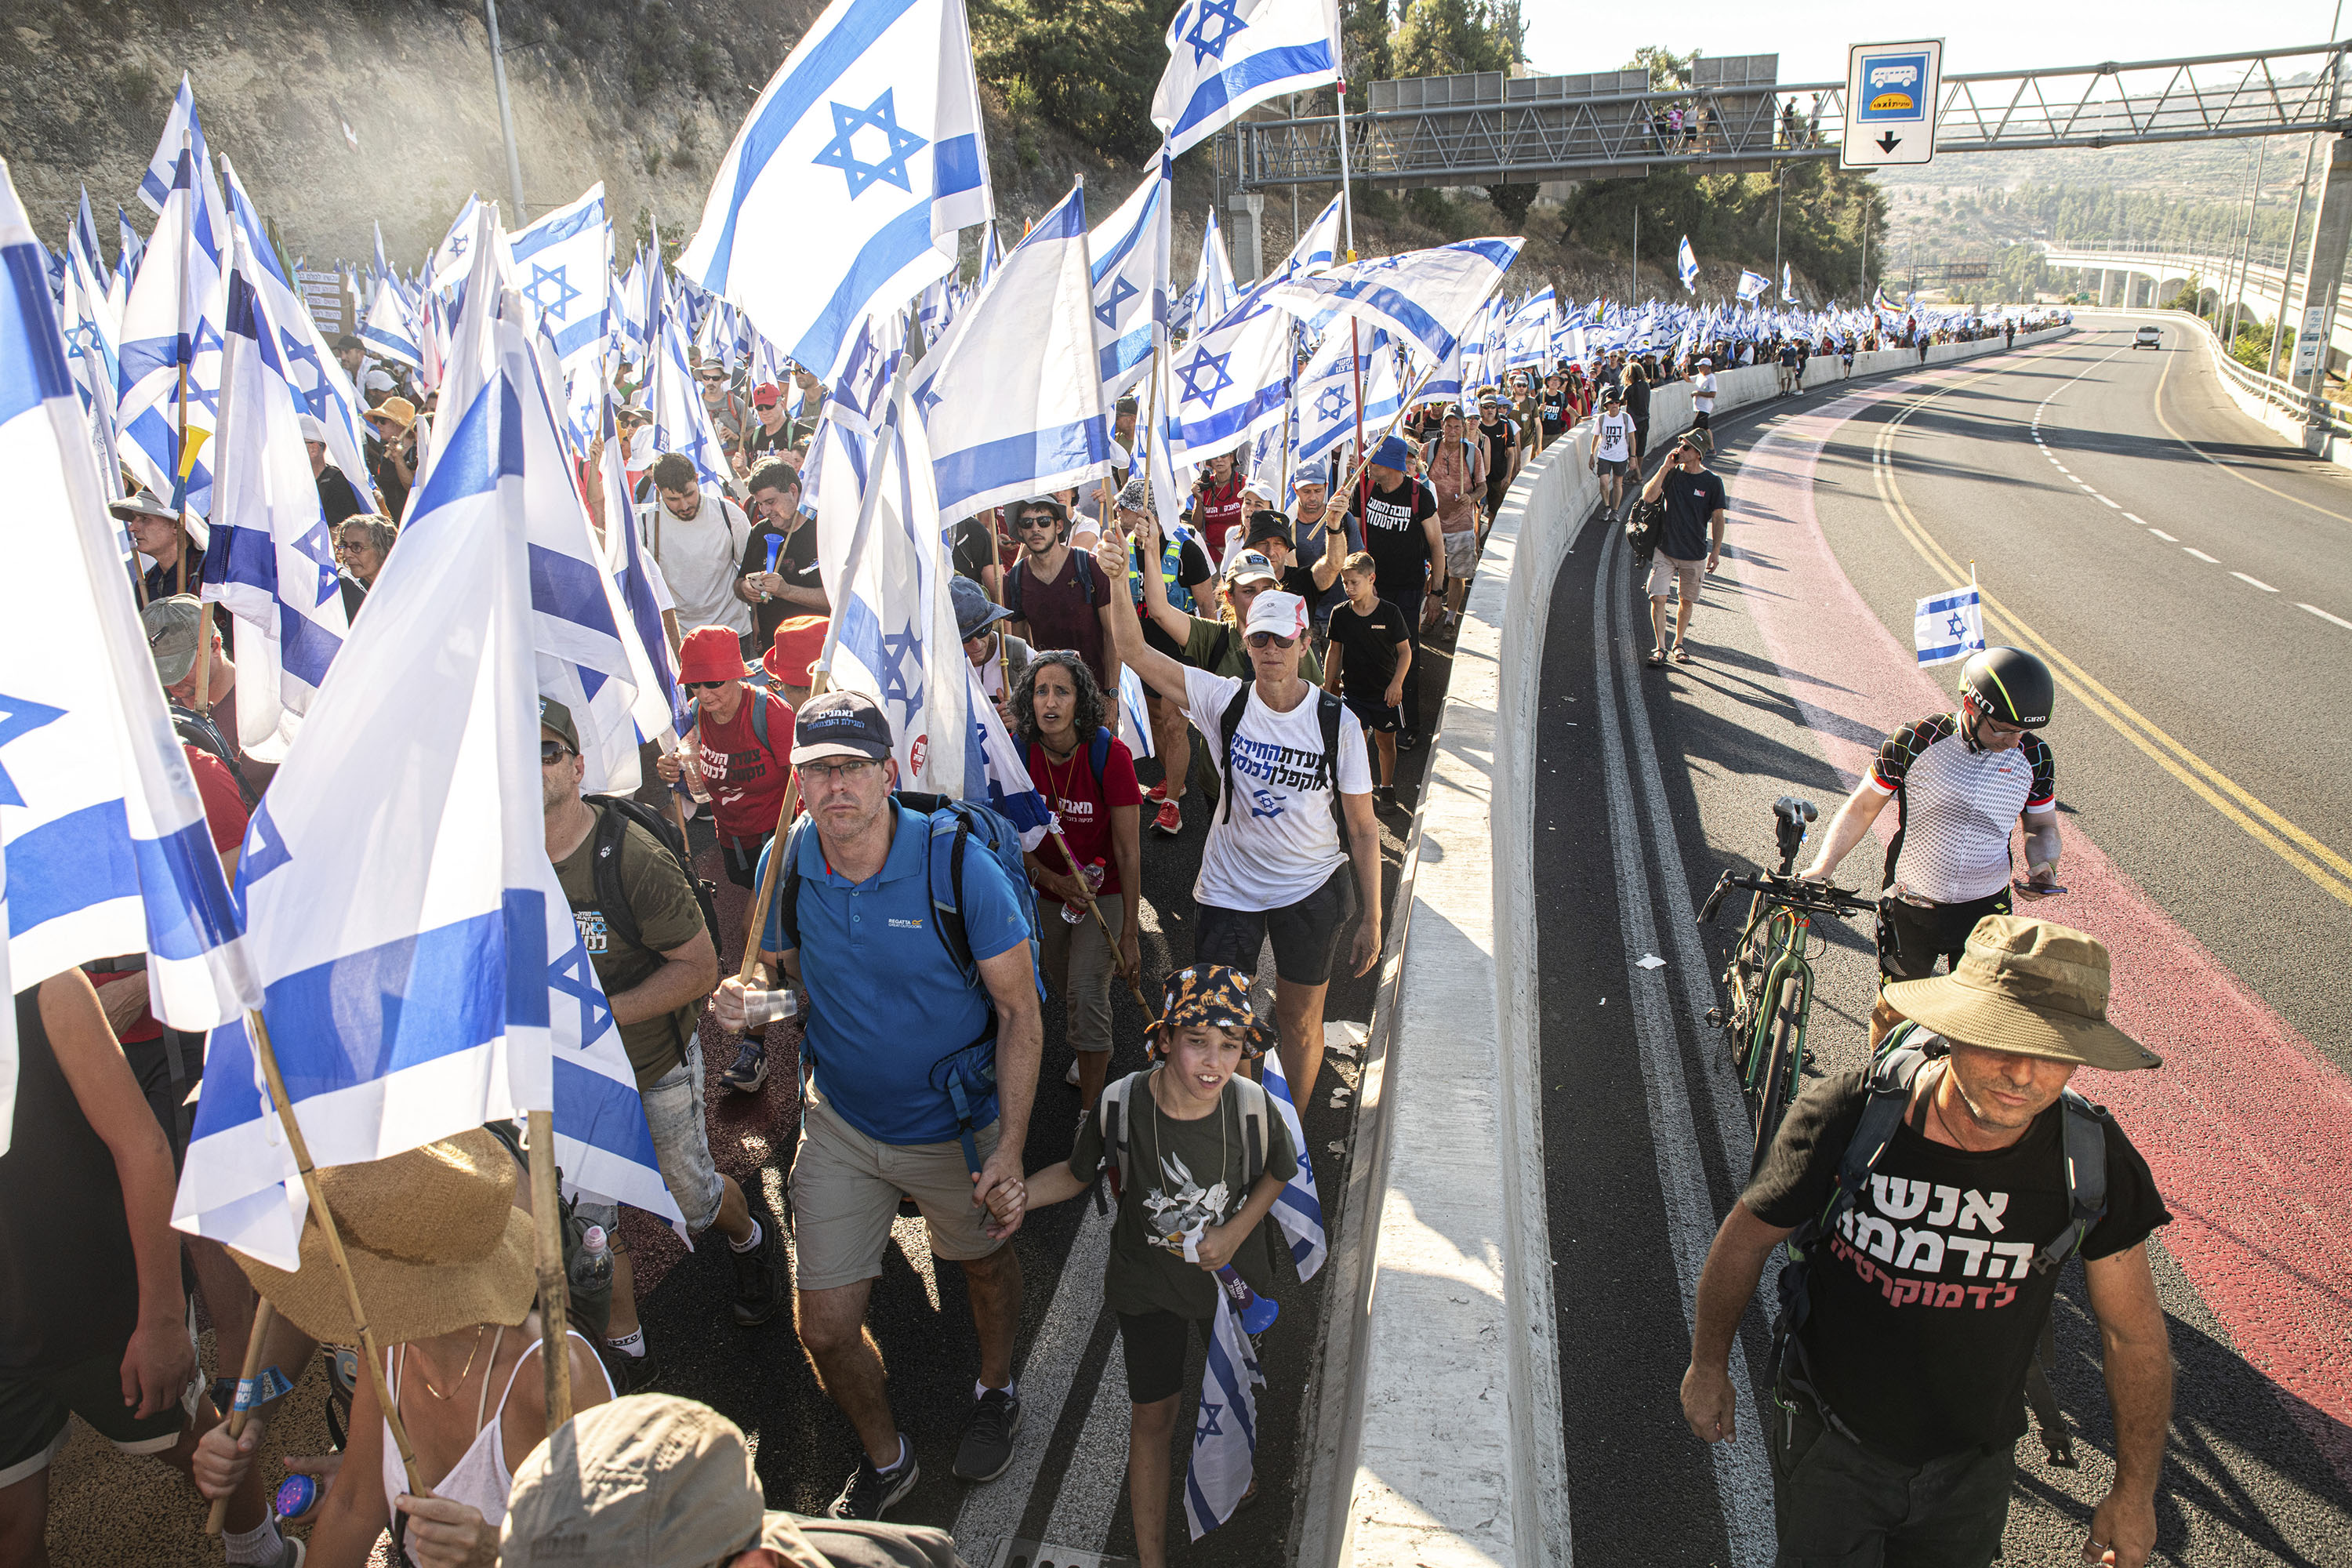 Protestors against the reform wave the Israeli flag as they climb the entrance road to Jerusalem on July 22.